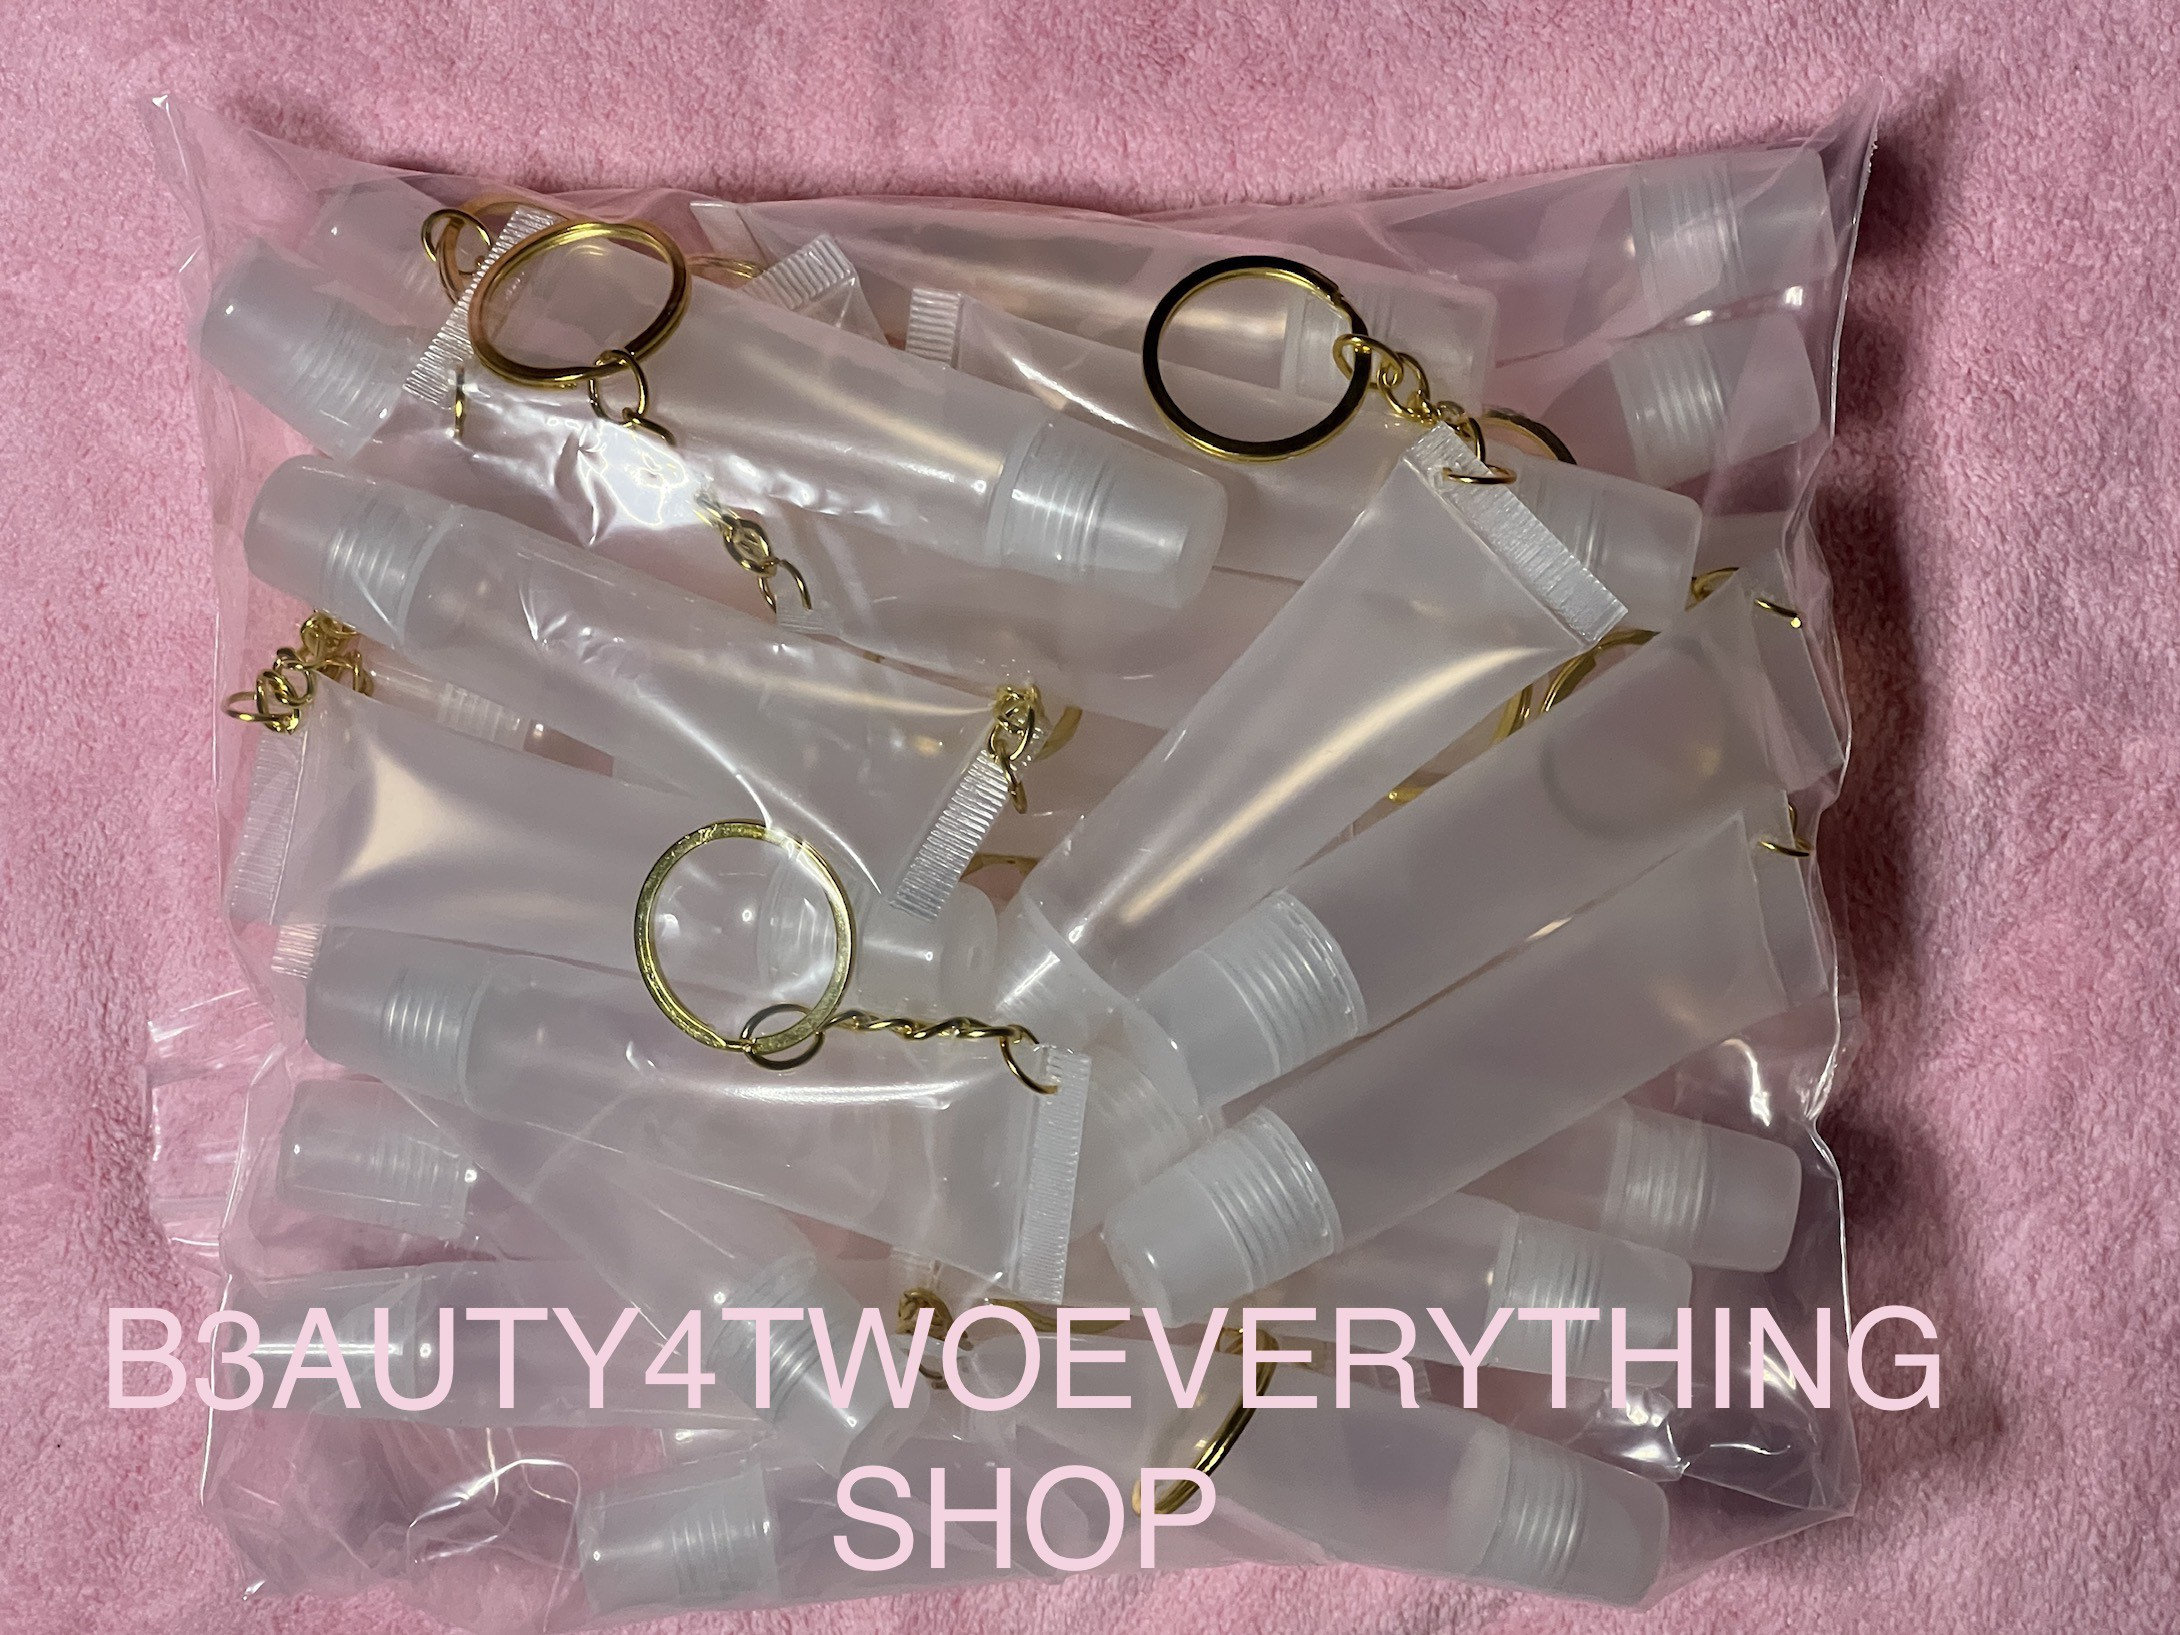 Custom round Empty lipgloss tube keychain 1.5 ml Mini lip gloss bottles  with key chain for cosmetic packaging-ITOE